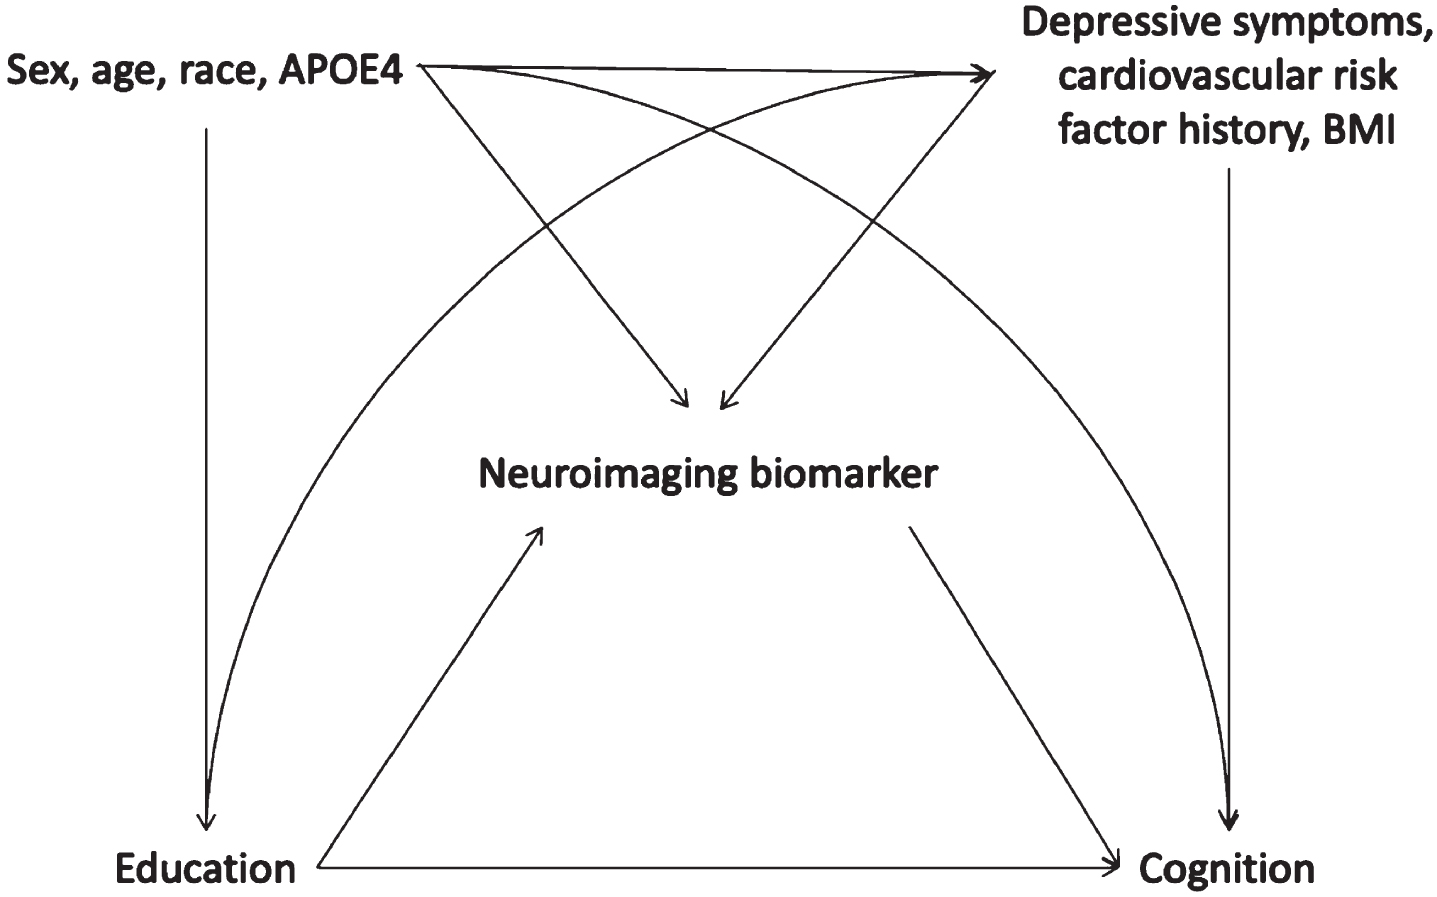 Hypothesized causal structure guiding choice of covariates in models to test mediation of the relationship between education and cognition by neuroimaging biomarkers. APOE4, Apolipoprotein E ɛ4 allele; BMI, body mass index.